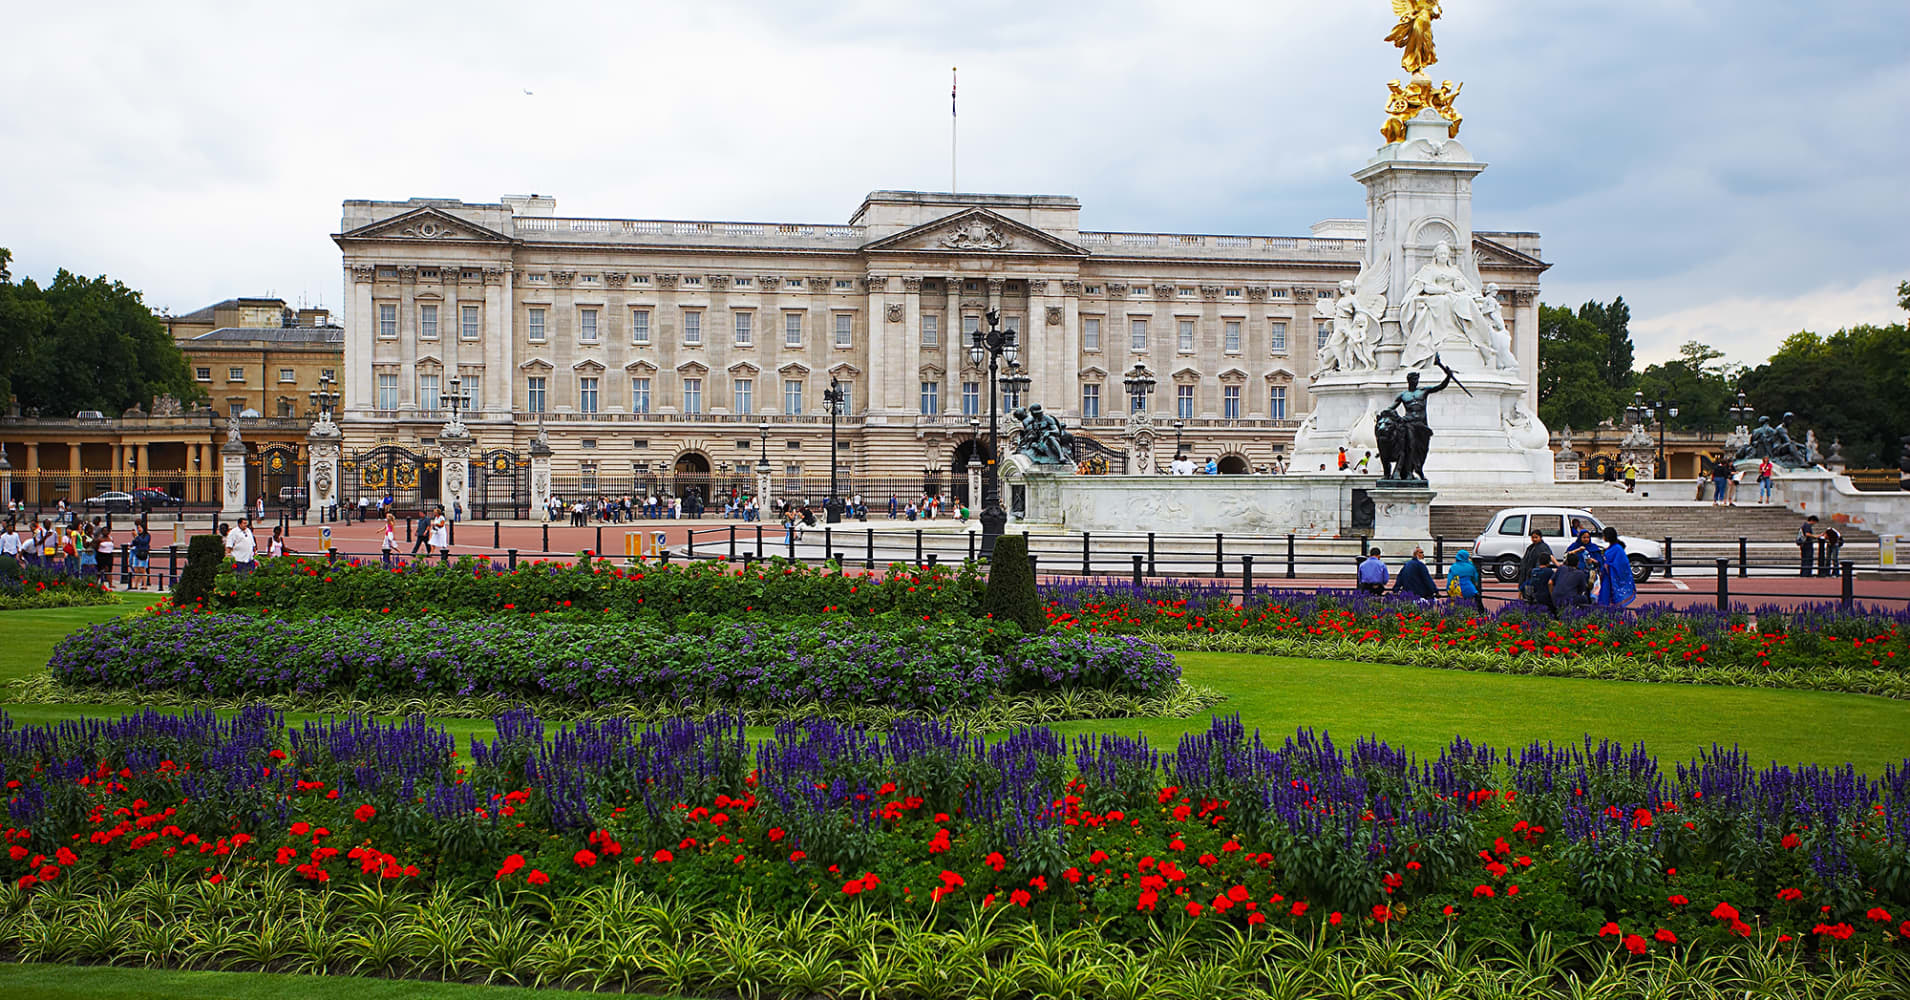 Queen Elizabeth launches search for new curtain and cushion maker at Buckingham Palace - CNBC